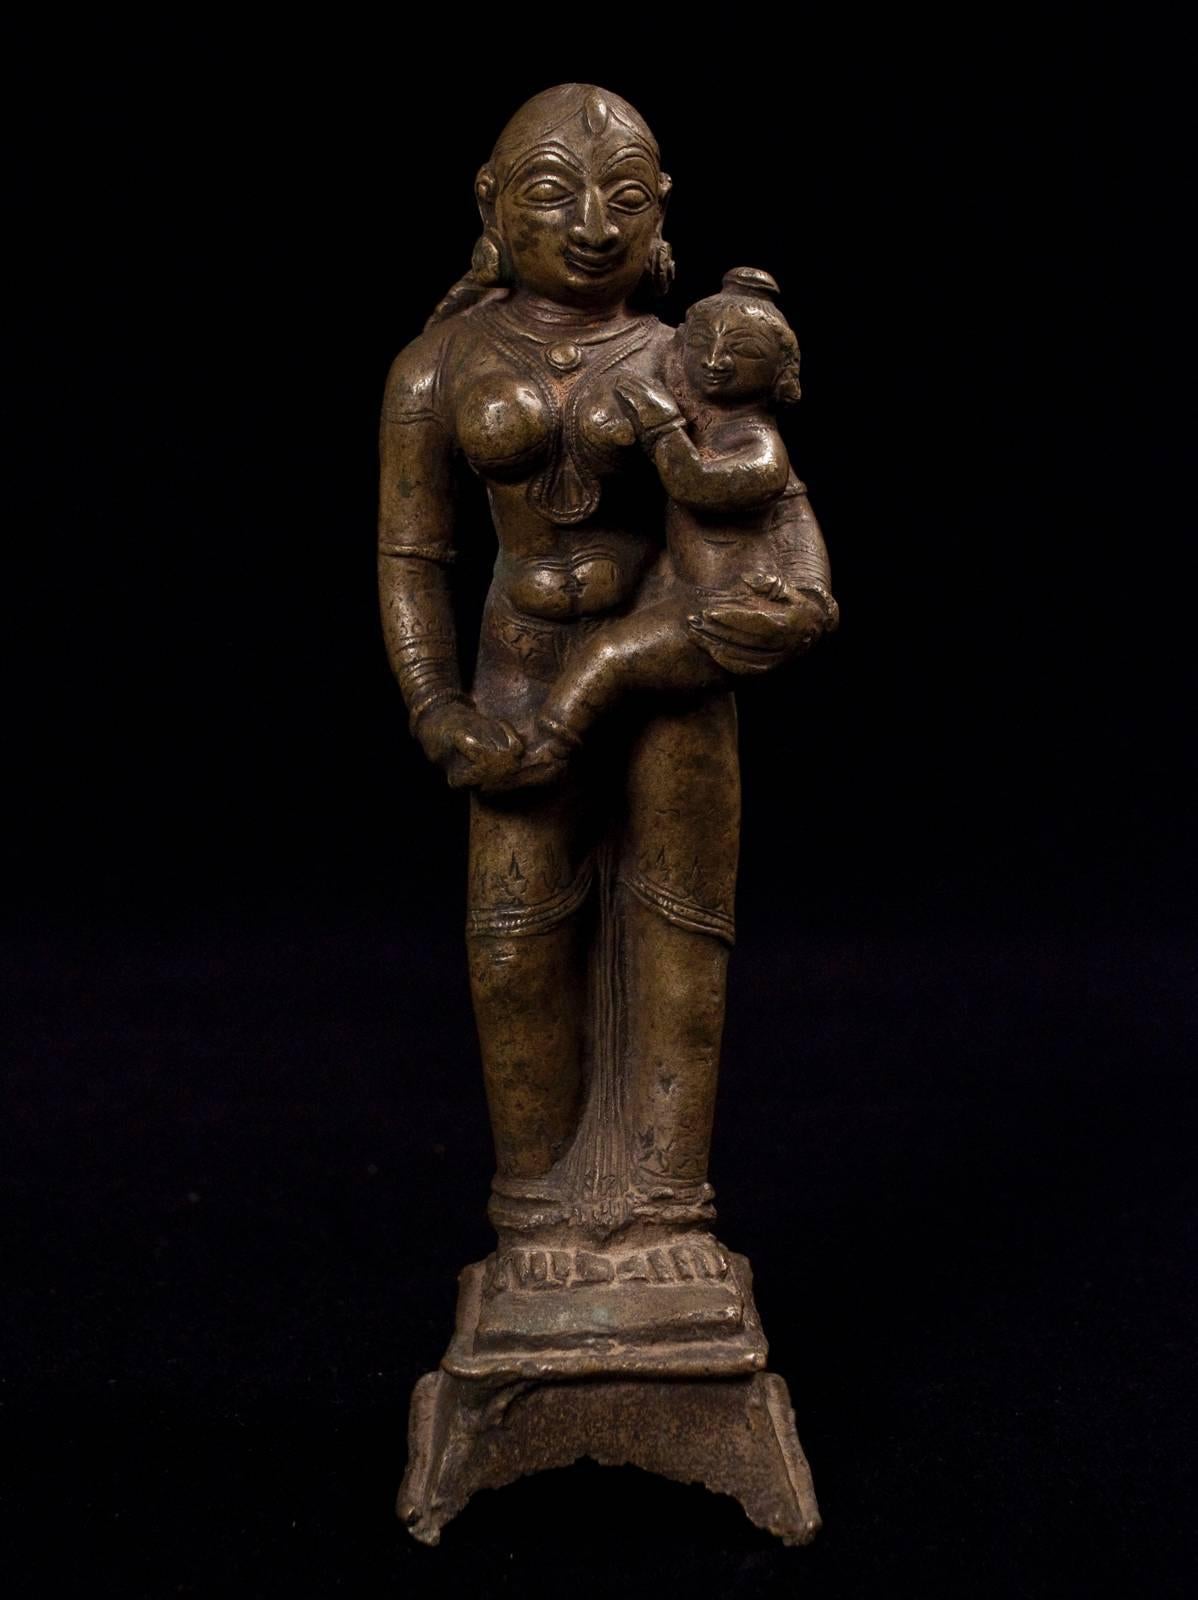 Offered by Zena Kruzick.
17th century lost wax cast bronze Parvati with Child, India.

